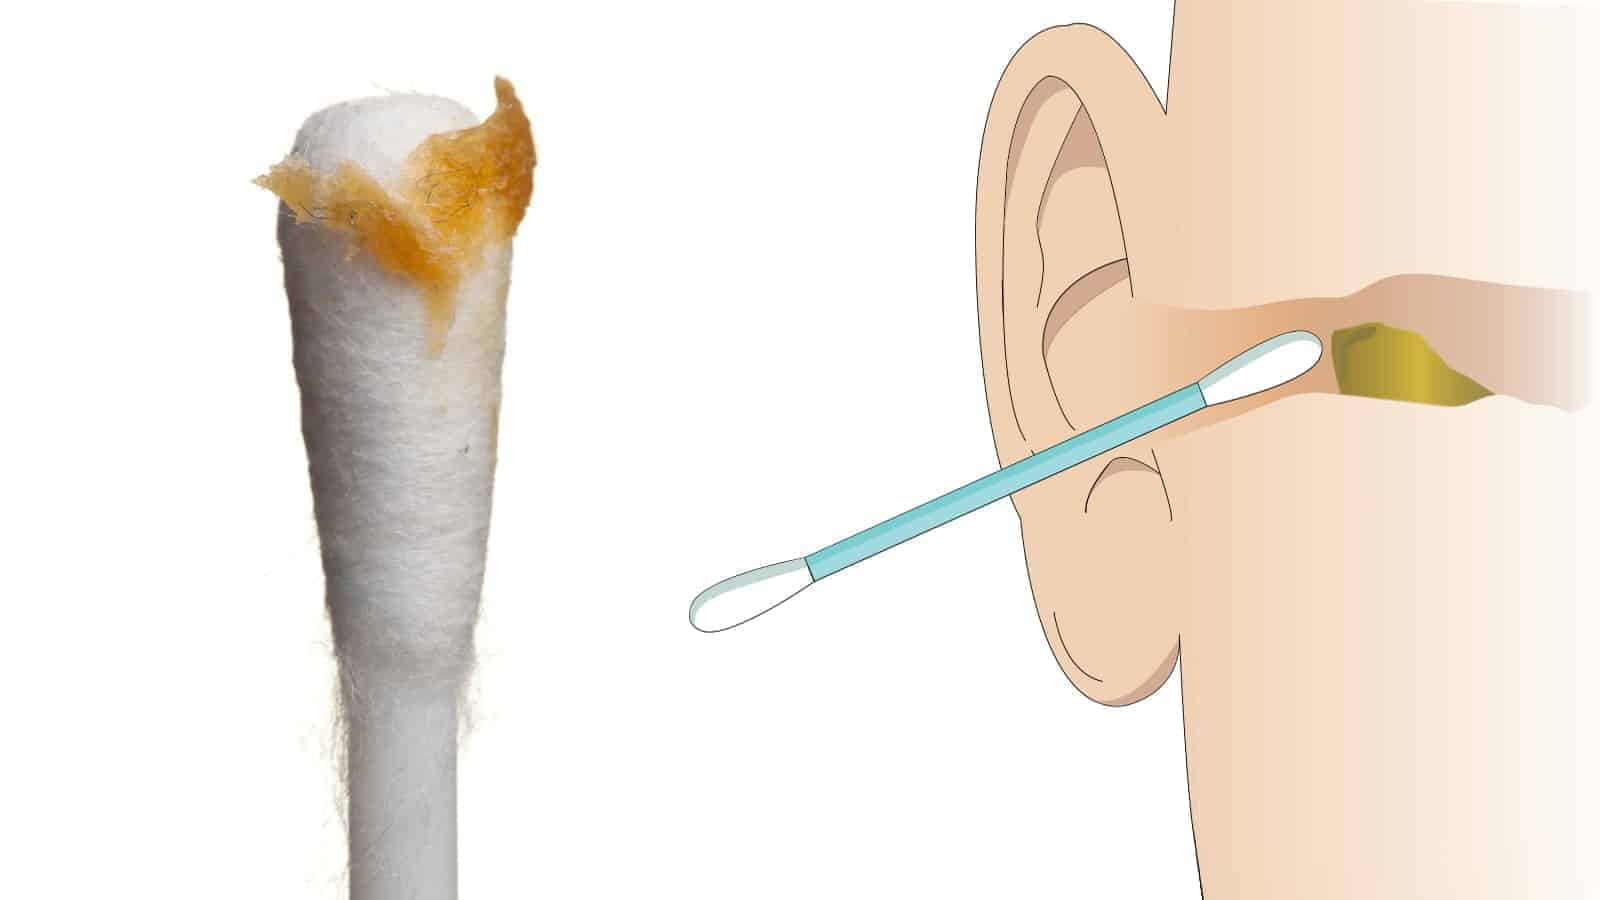 Ear Specialists Explain 6 Reasons to Stop Cleaning Ears With Cotton Buds